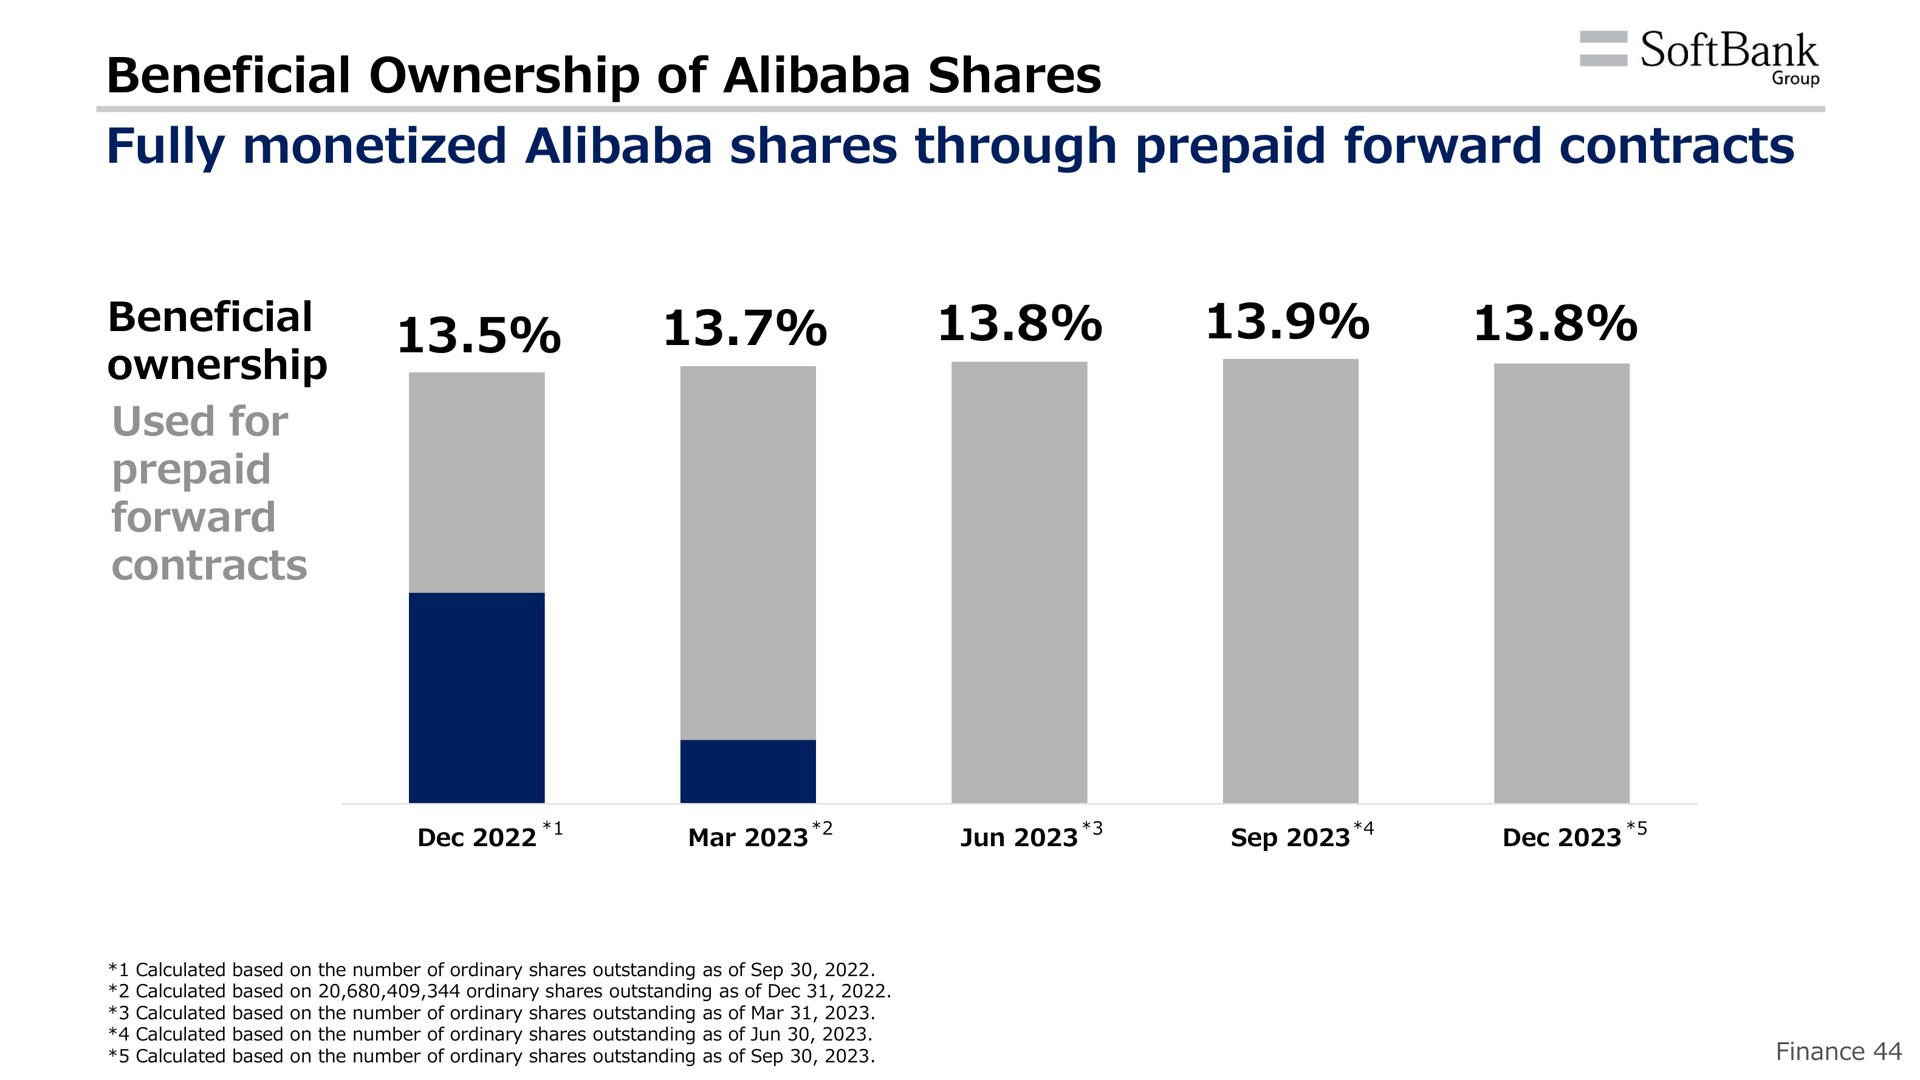 beneficial ownership of shares fully monetized shares through prepaid forward contracts | SoftBank